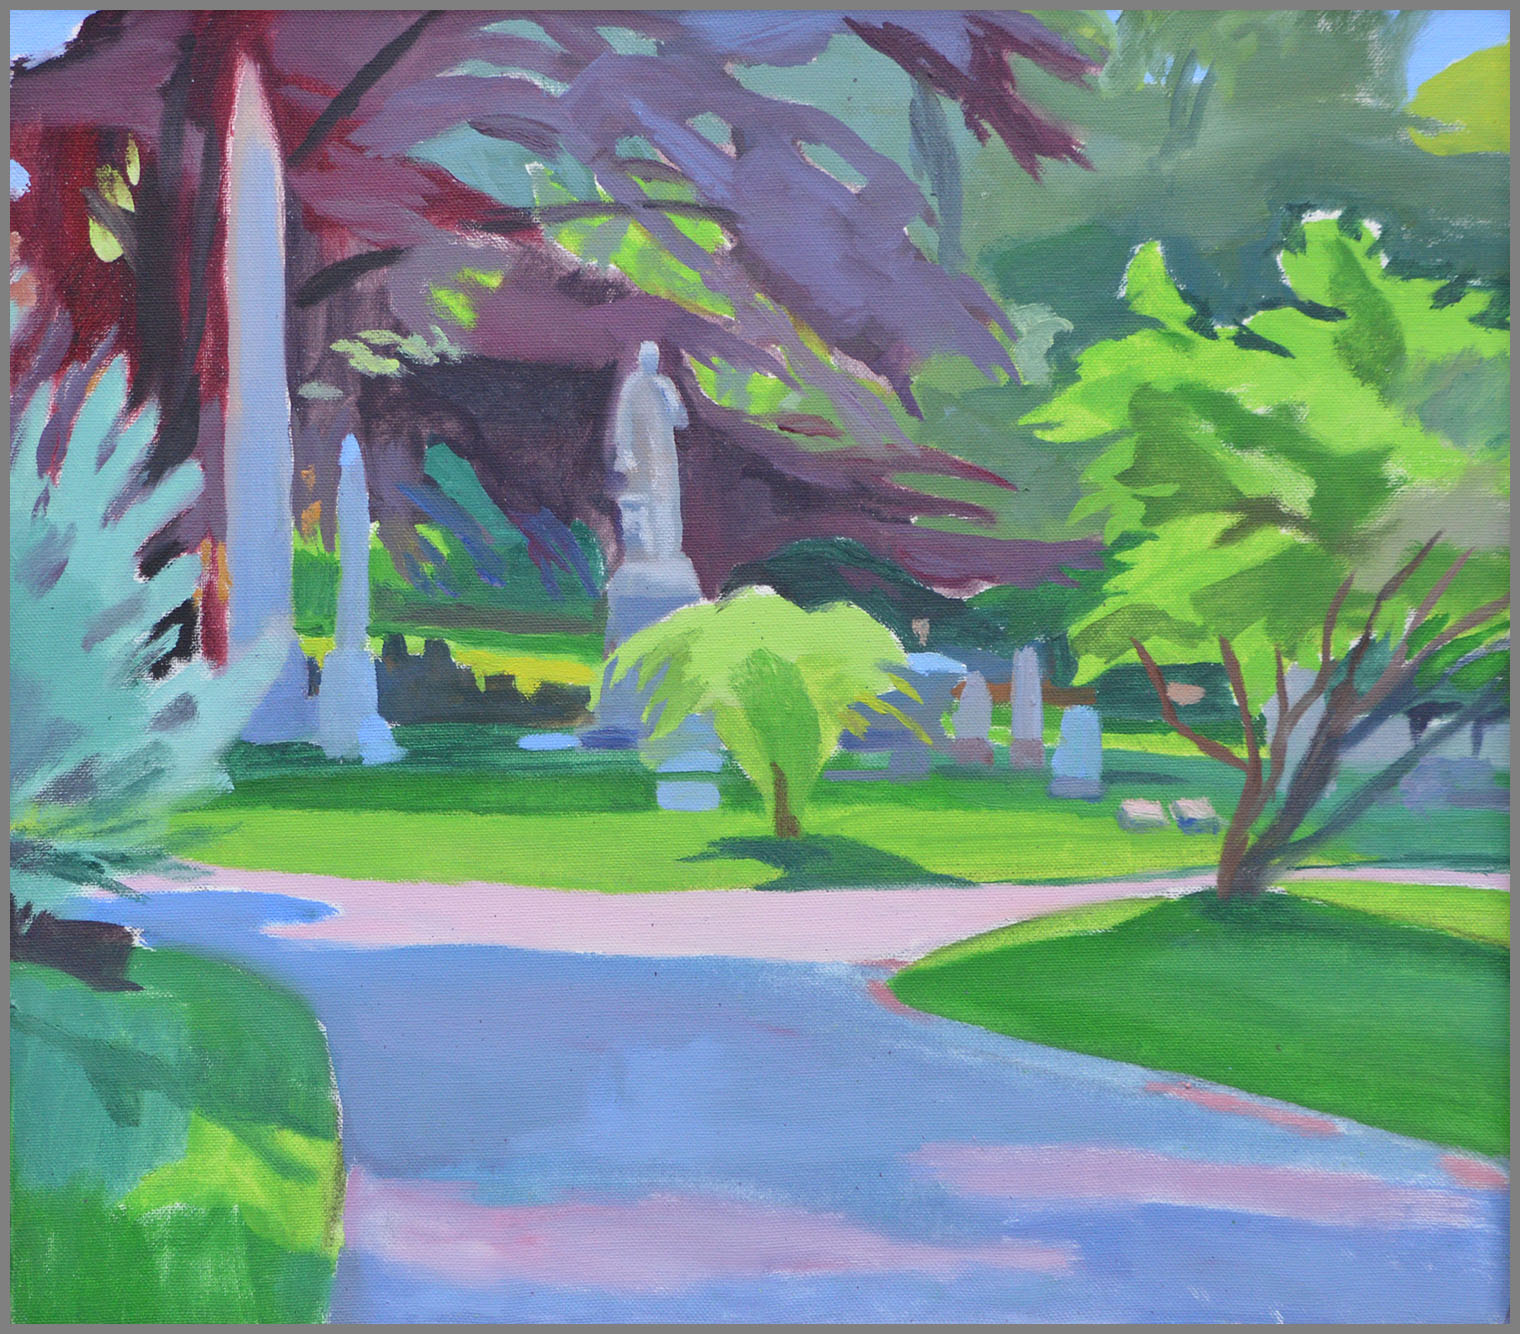  Mt Hope Cemetery with Statue, oil/canvas, 16 x 18 inches 